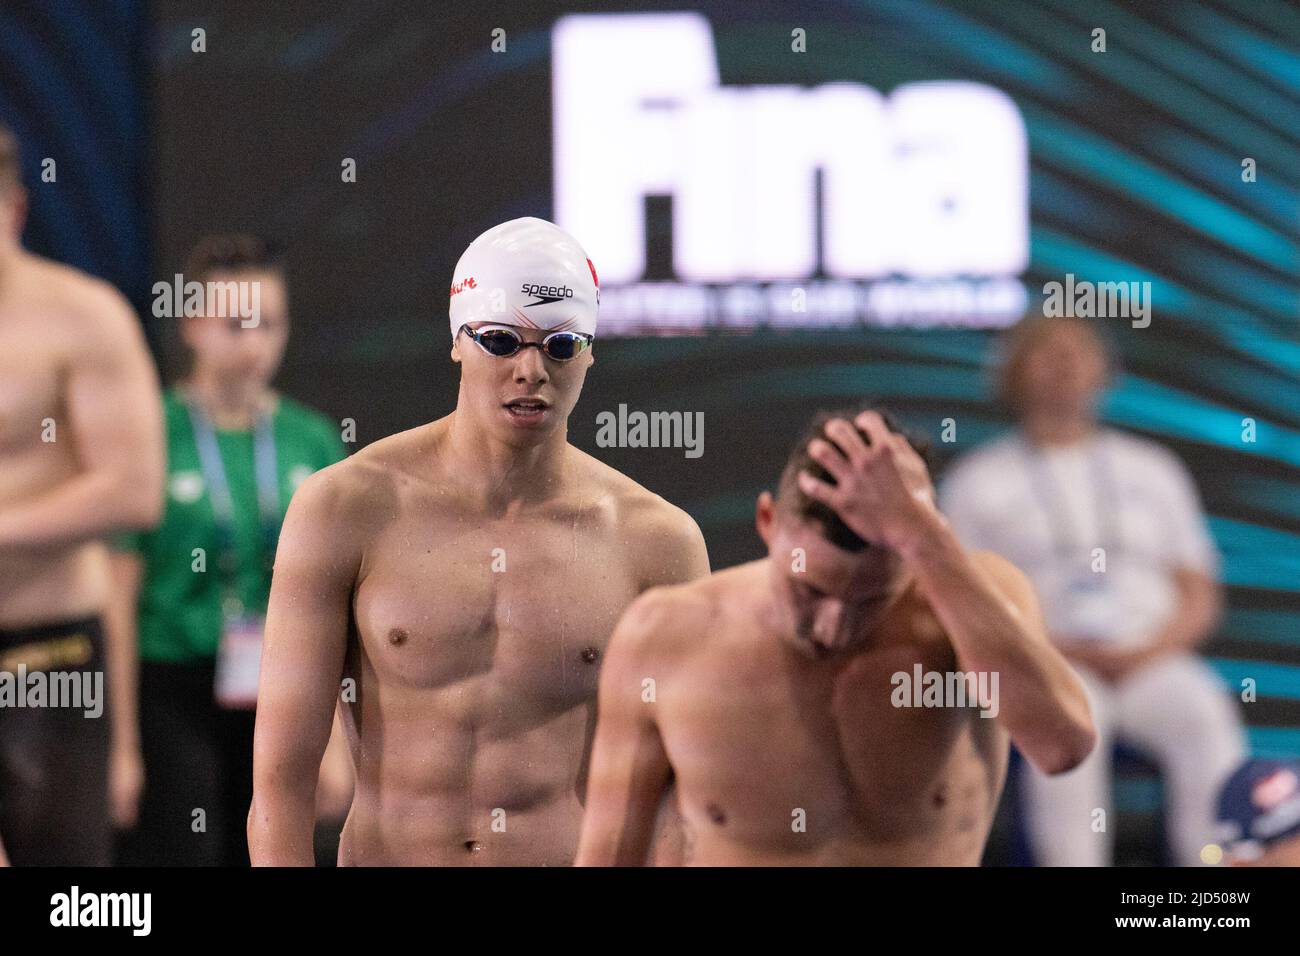 Budapest. 18th June, 2022. Ji Xinjie (L) of China is seen after the men's 400m freestyle heat at the 19th FINA World Championships in Budapest, Hungary on June 18, 2022. Credit: Attila Volgyi/Xinhua/Alamy Live News Stock Photo